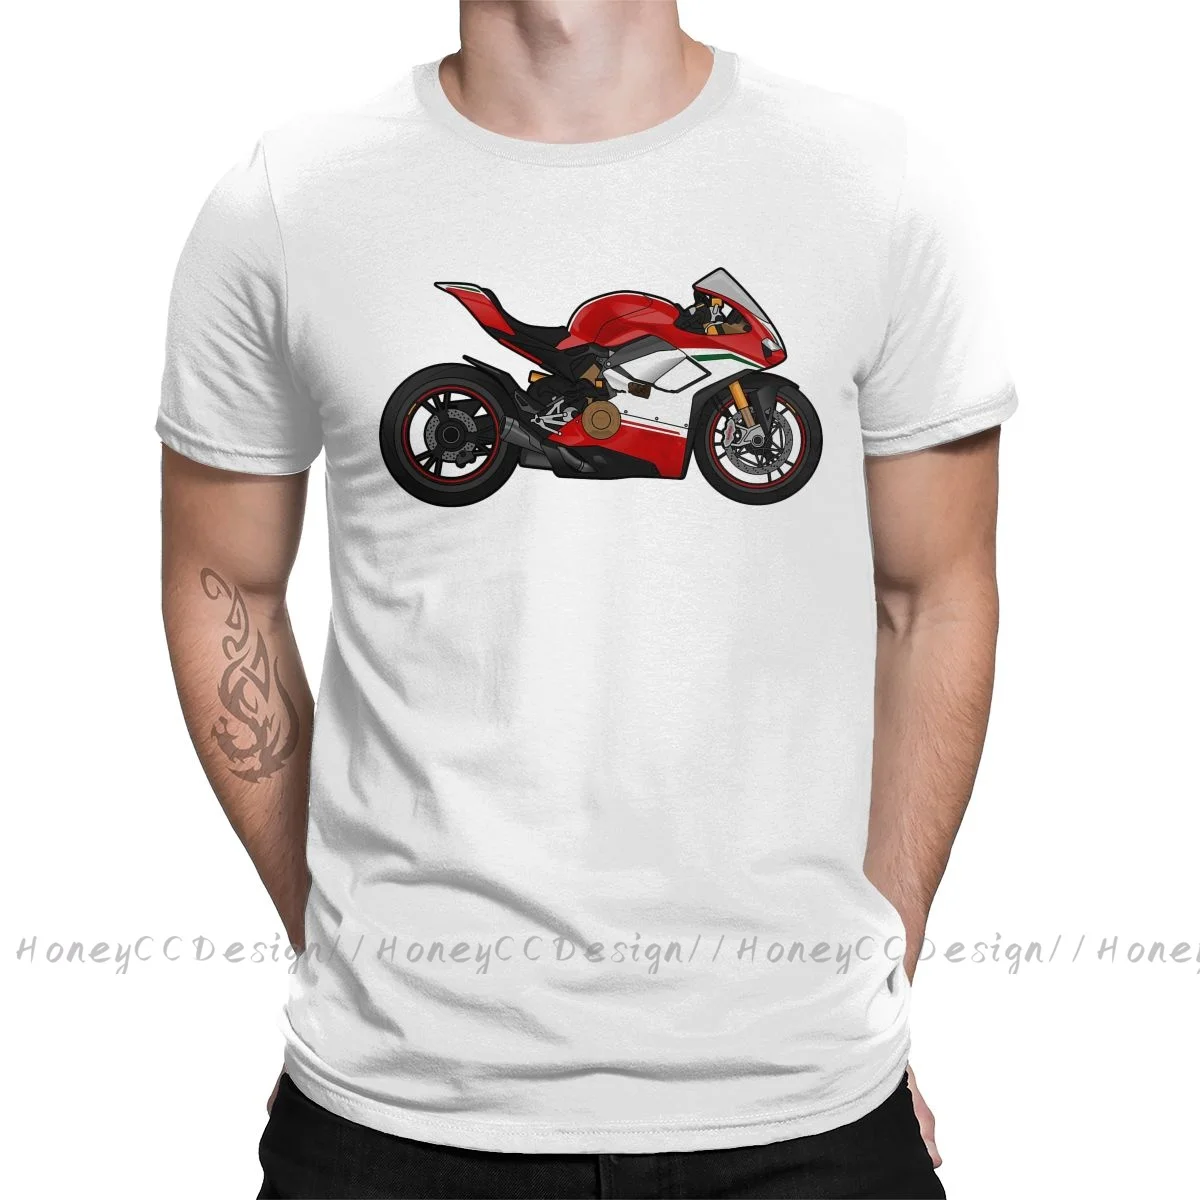 Rossi New Arrival T-Shirt Ducati Panigale V4 Speciale Shirt Crewneck Cotton Men TShirt For Adults Plus Size